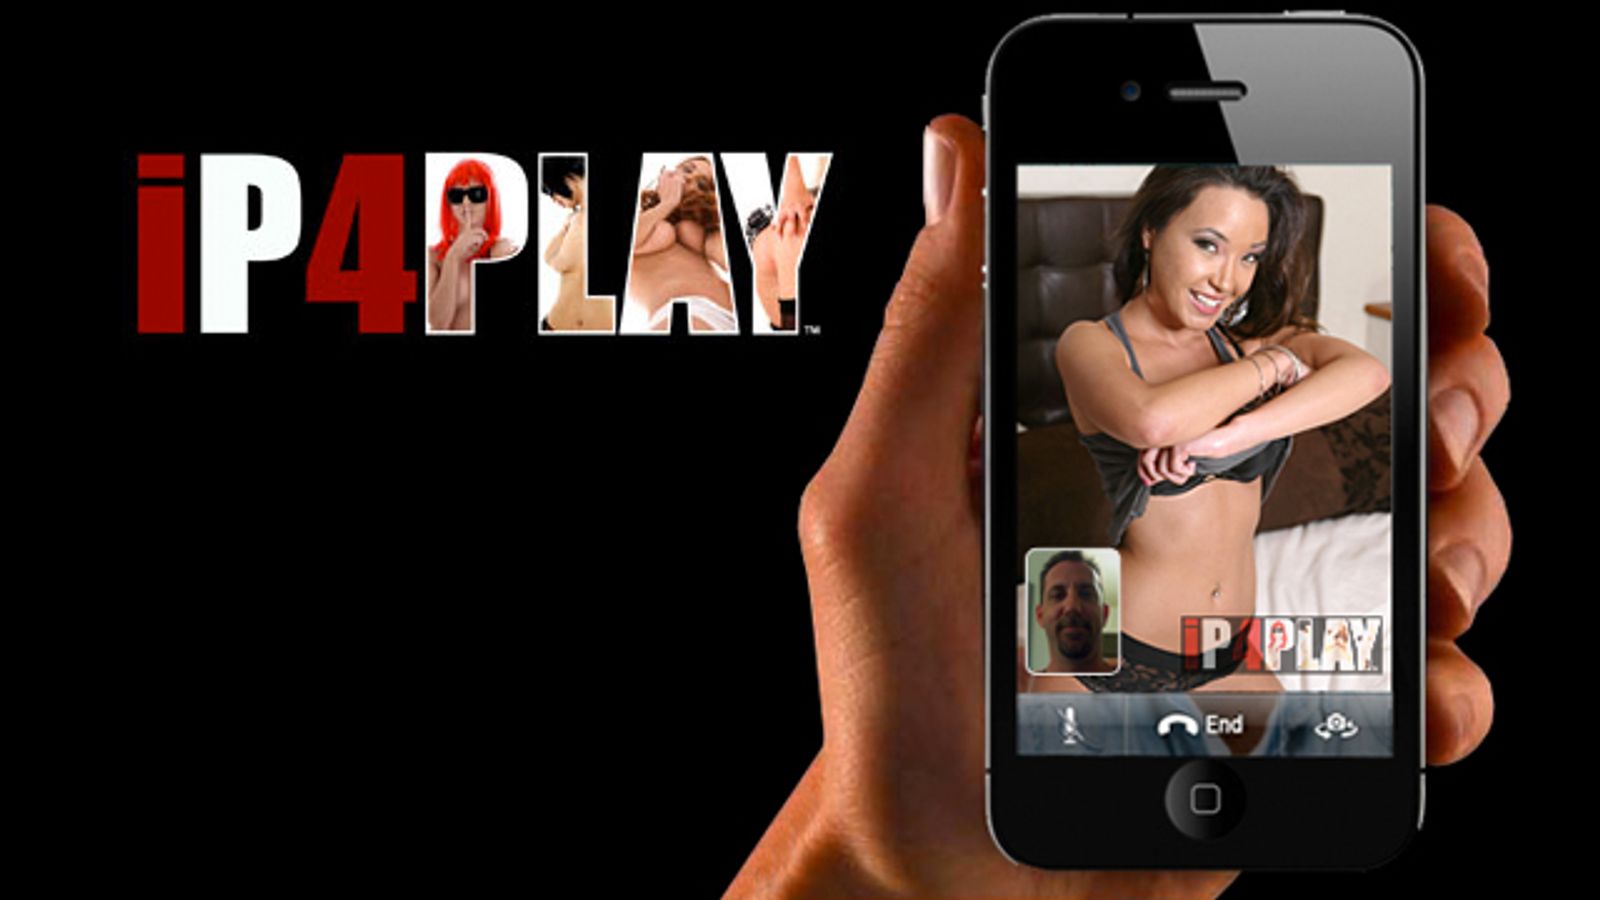 IP4Play Launches First iPhone 4 FaceTime 'Porn' Service